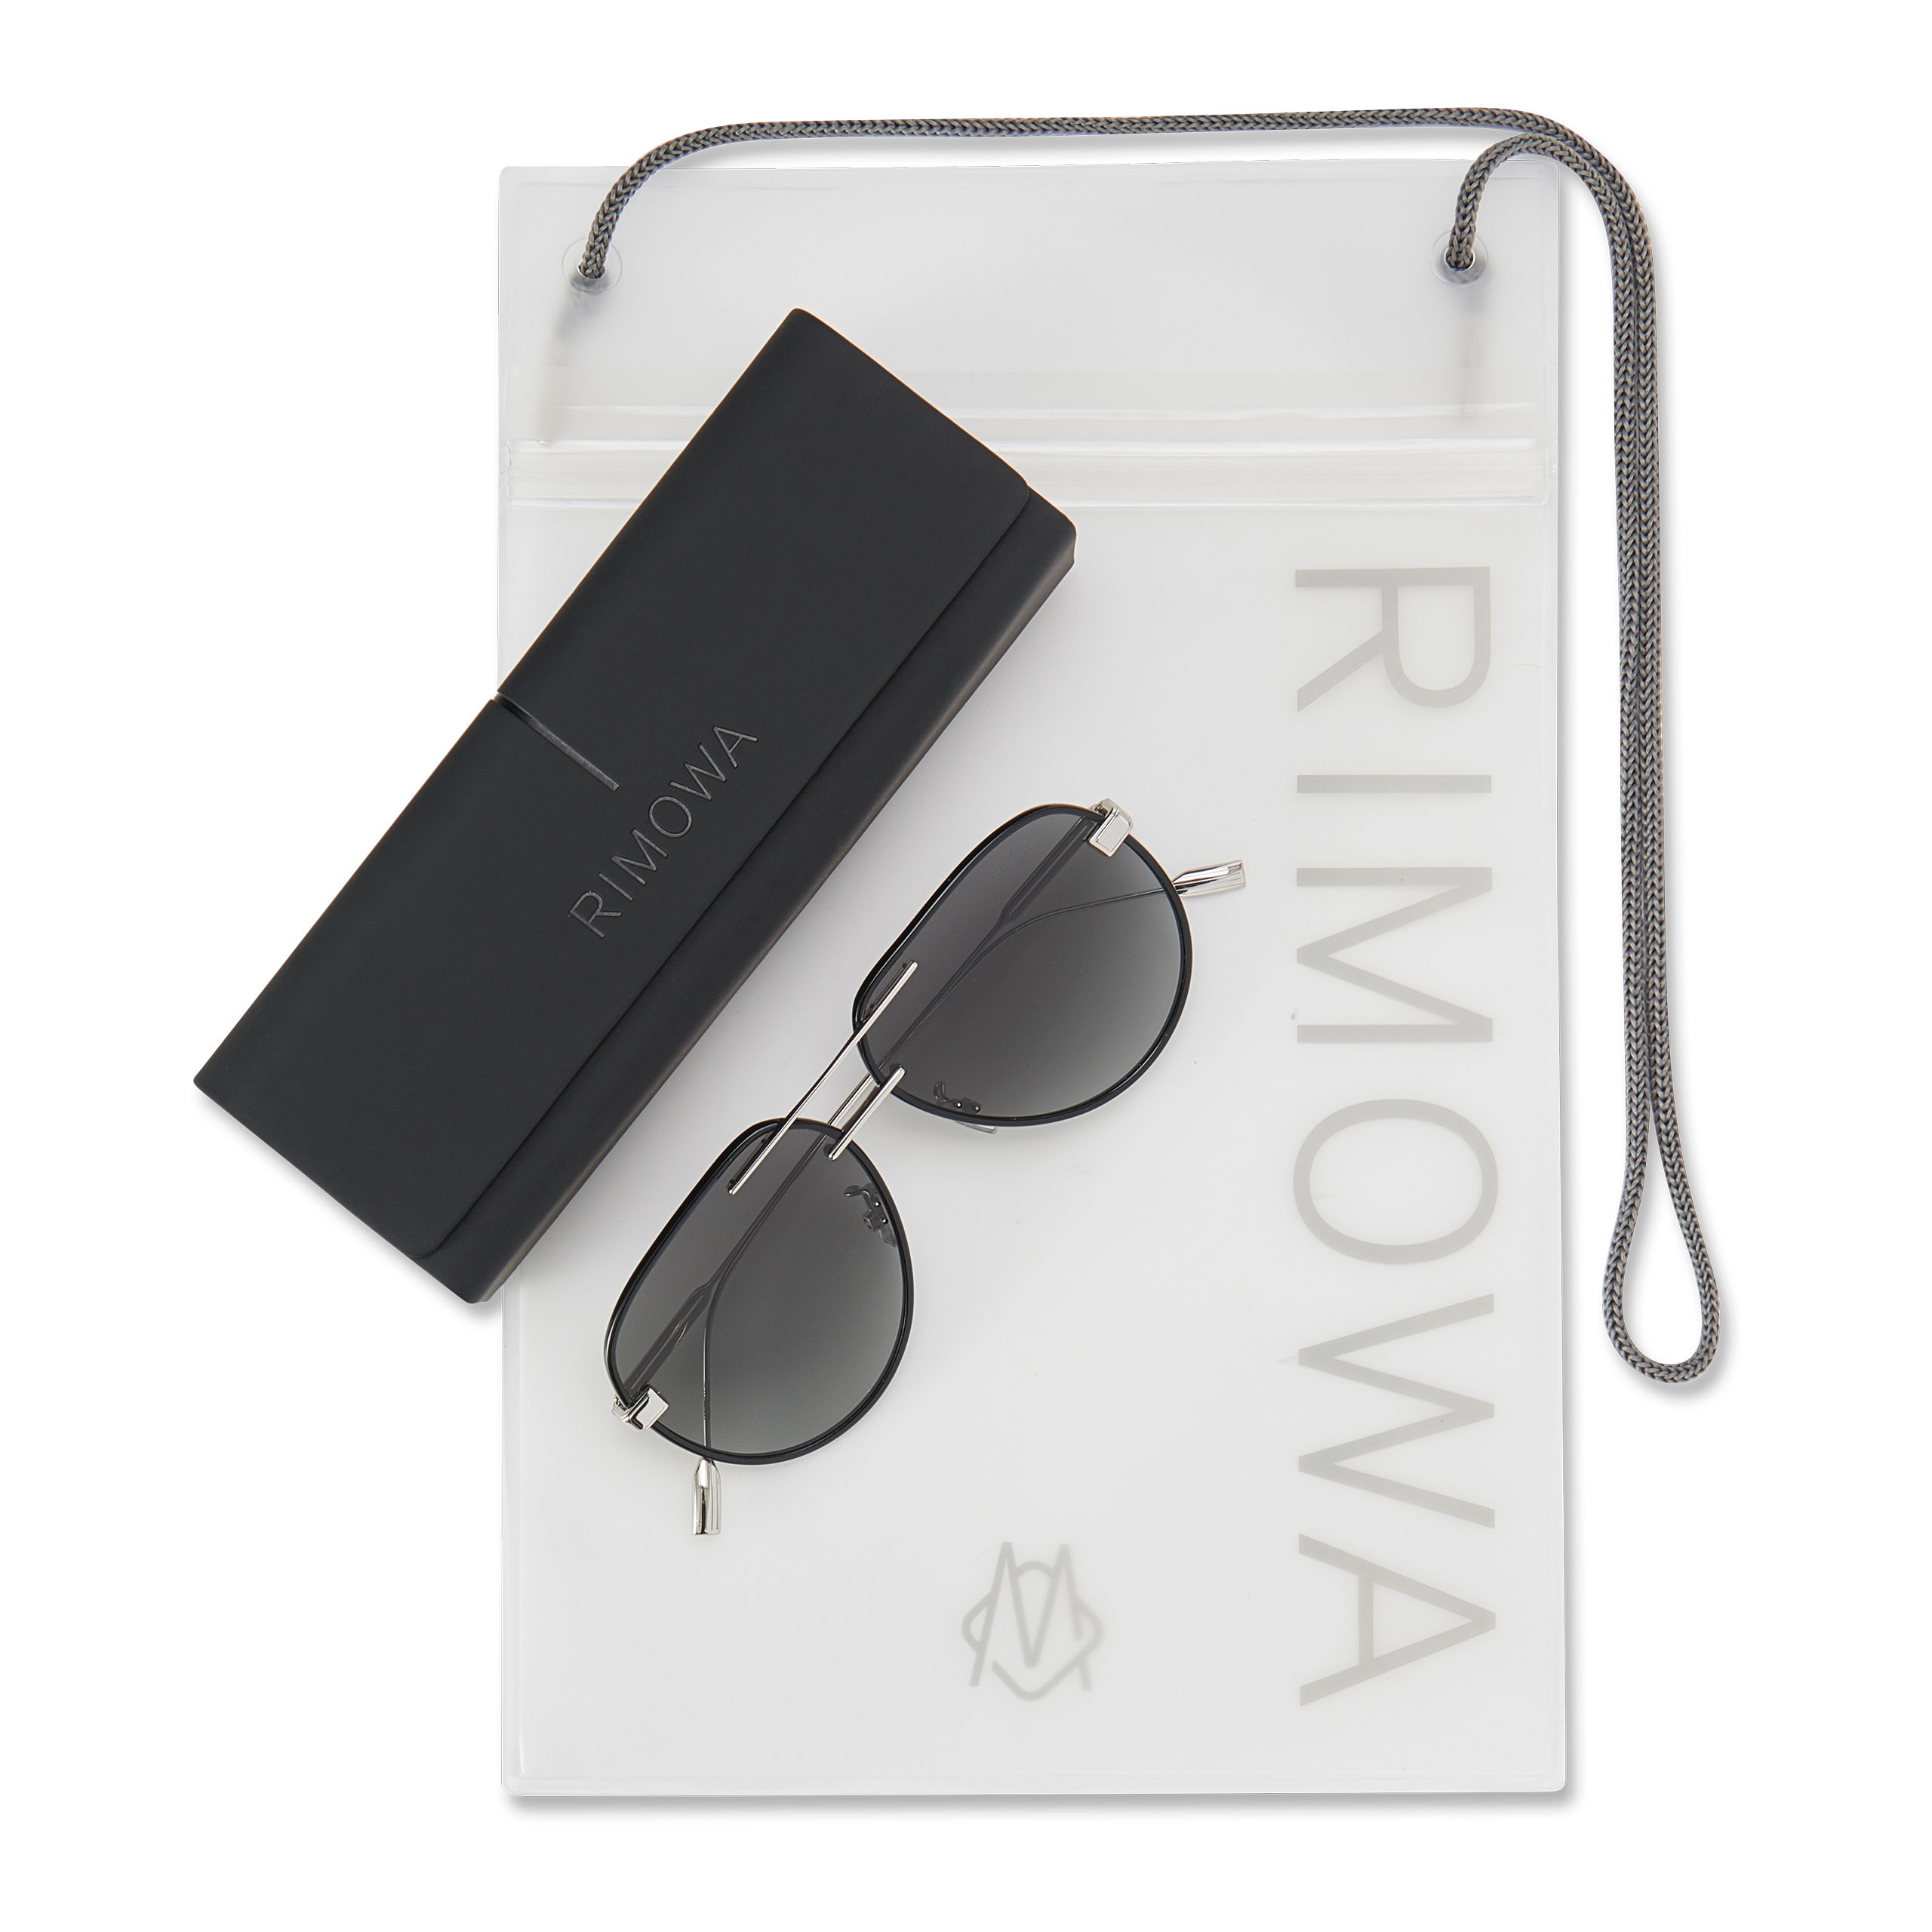 All Rimowa sunglasses come with their own case and pouch. (Photo credit: Rimowa)